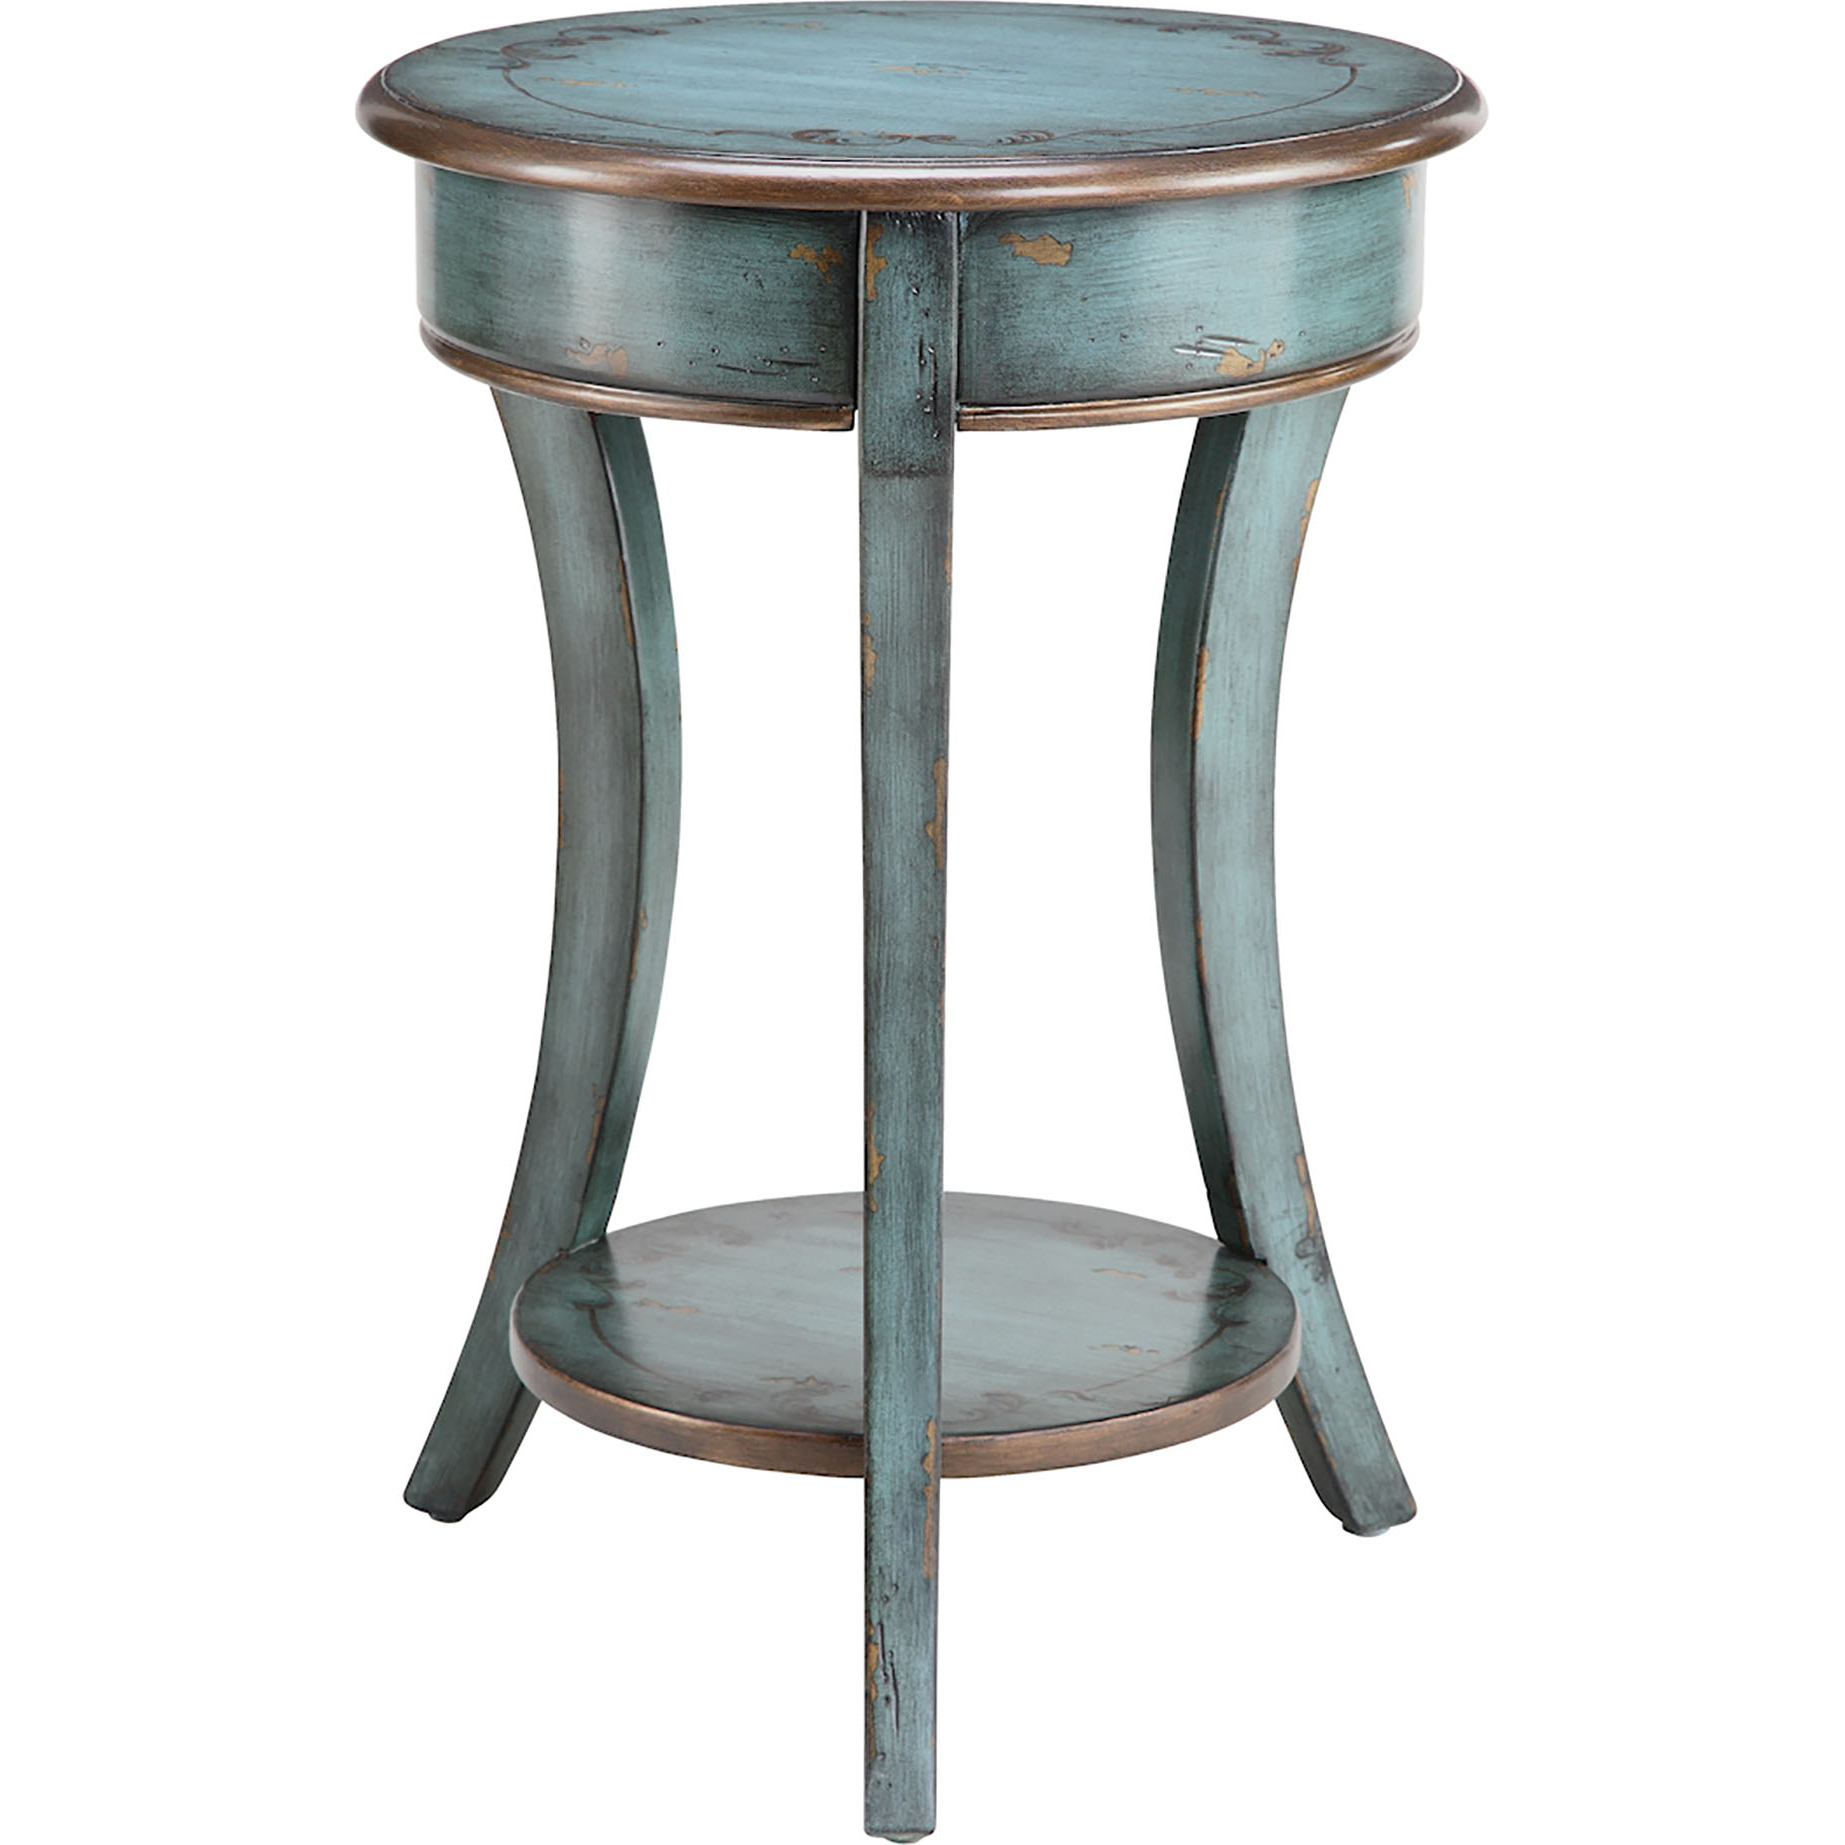 Stein world painted treasures end table